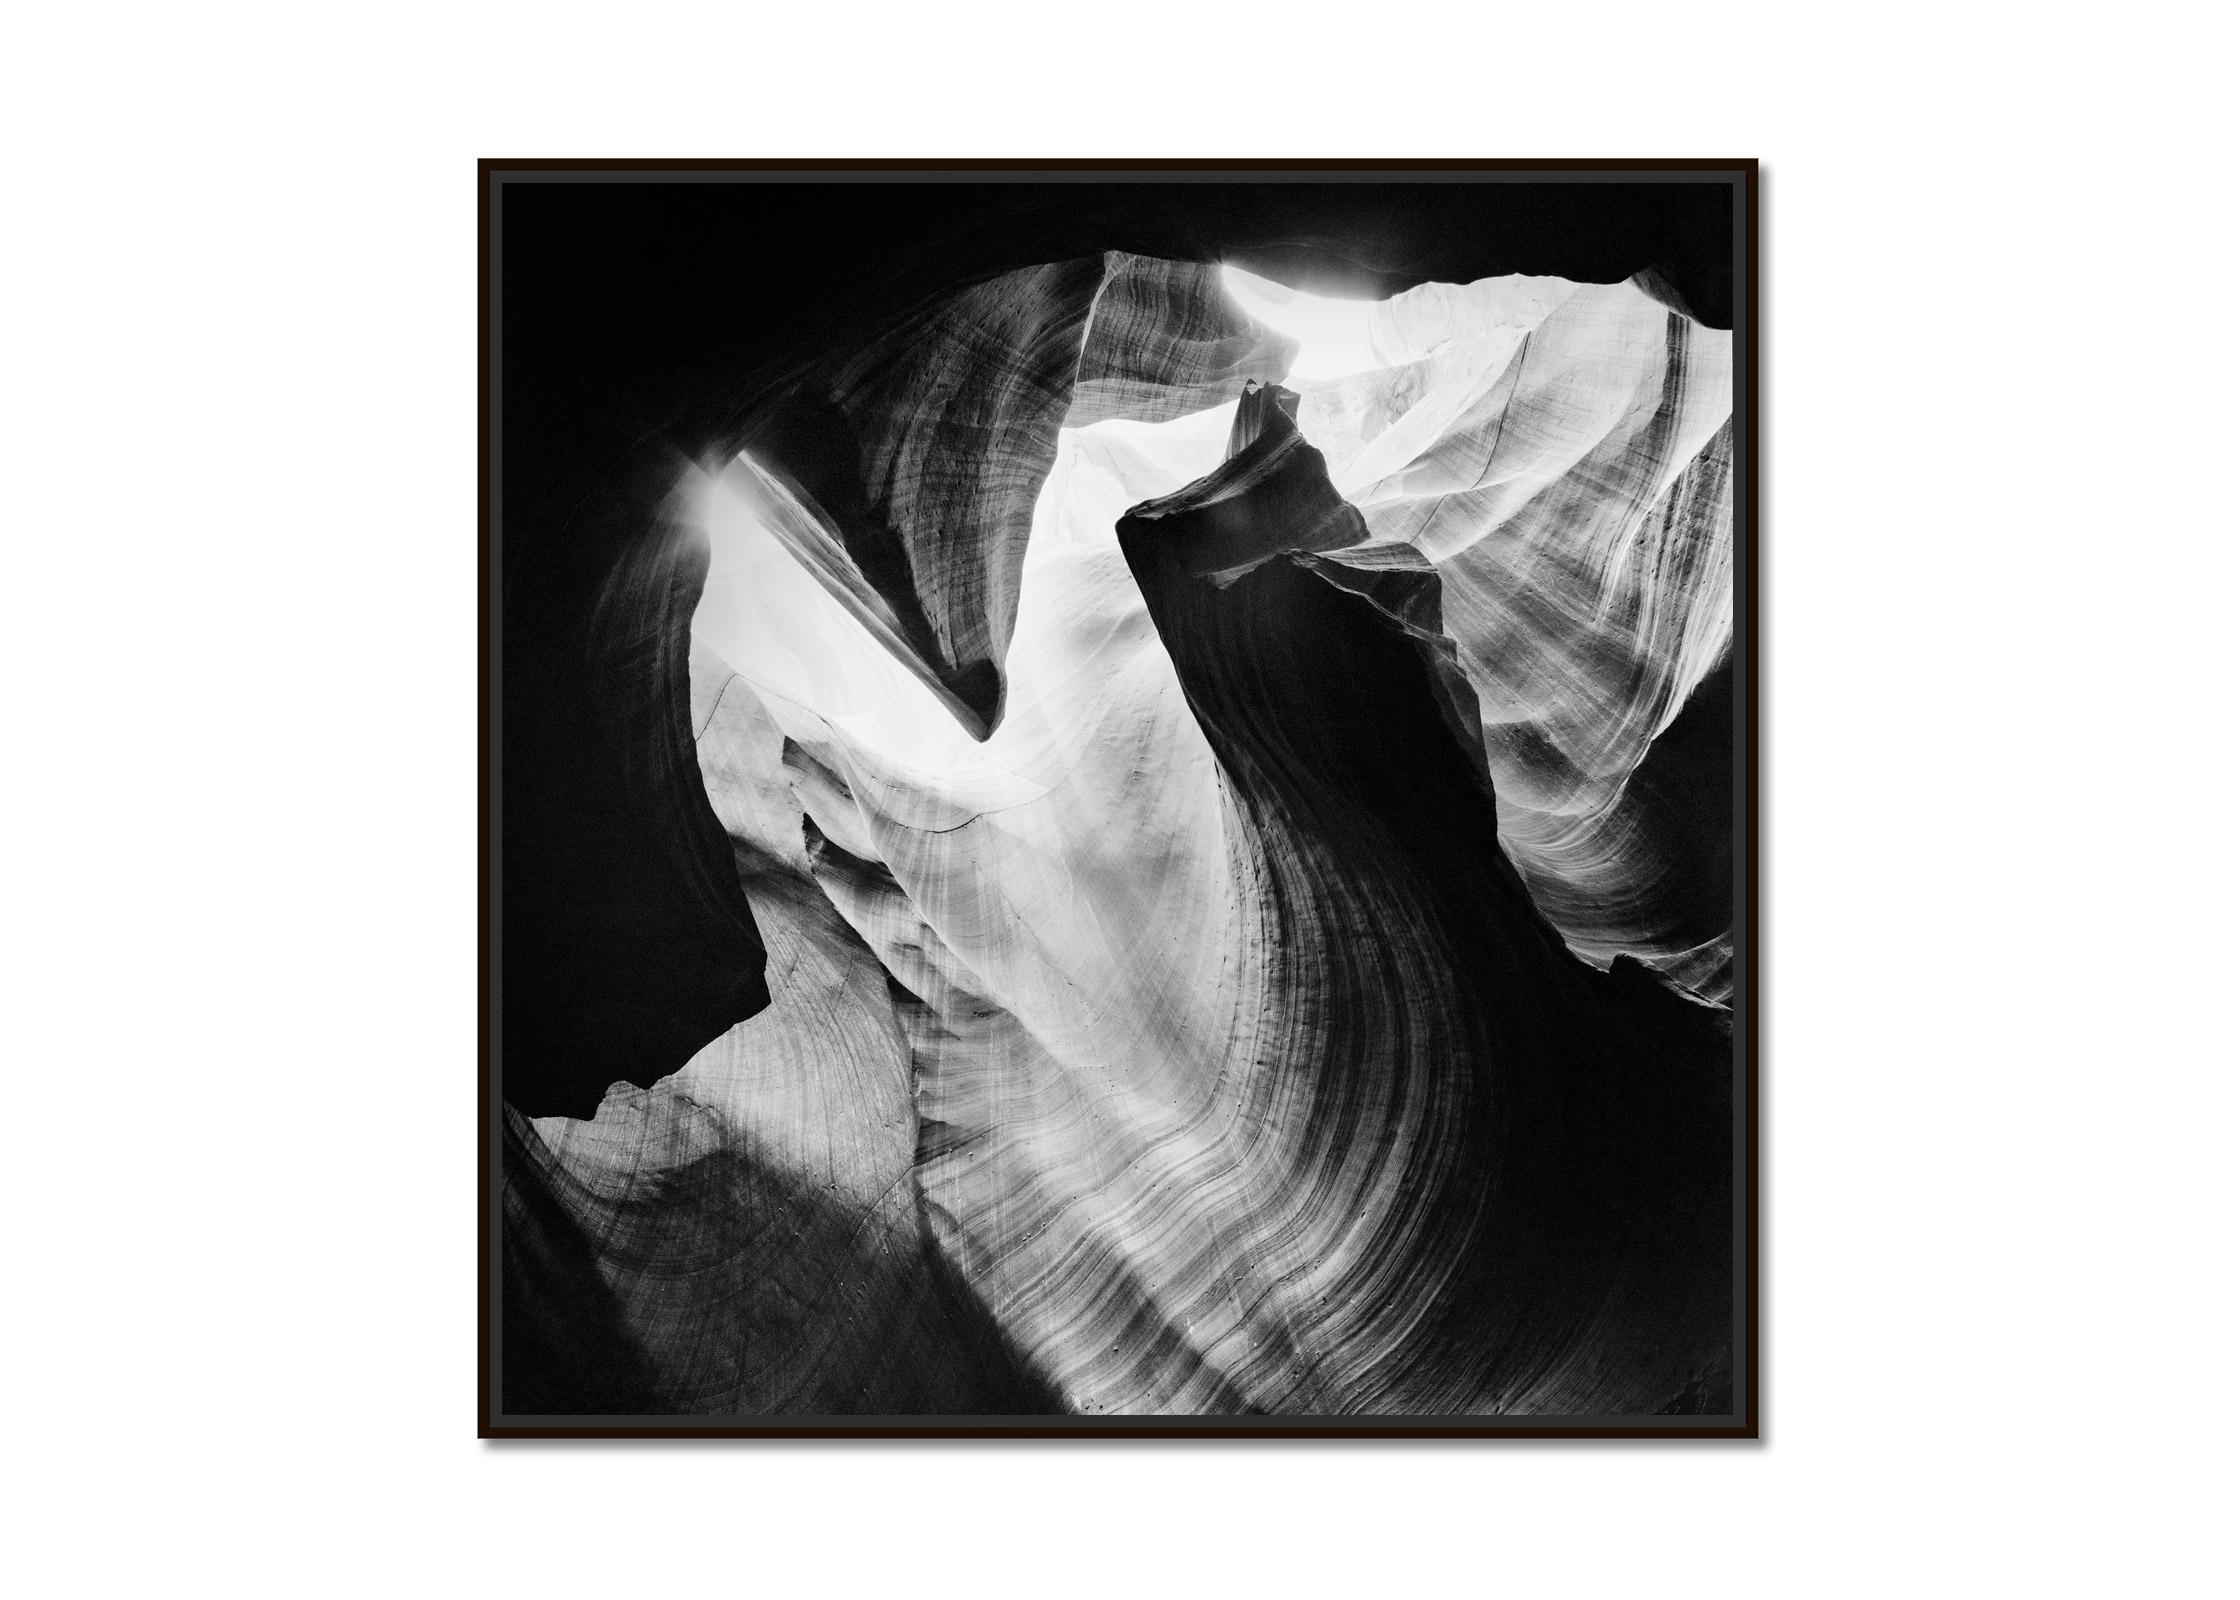 Antelope Canyon rock formation USA black white abstract photography landscape - Photograph by Gerald Berghammer